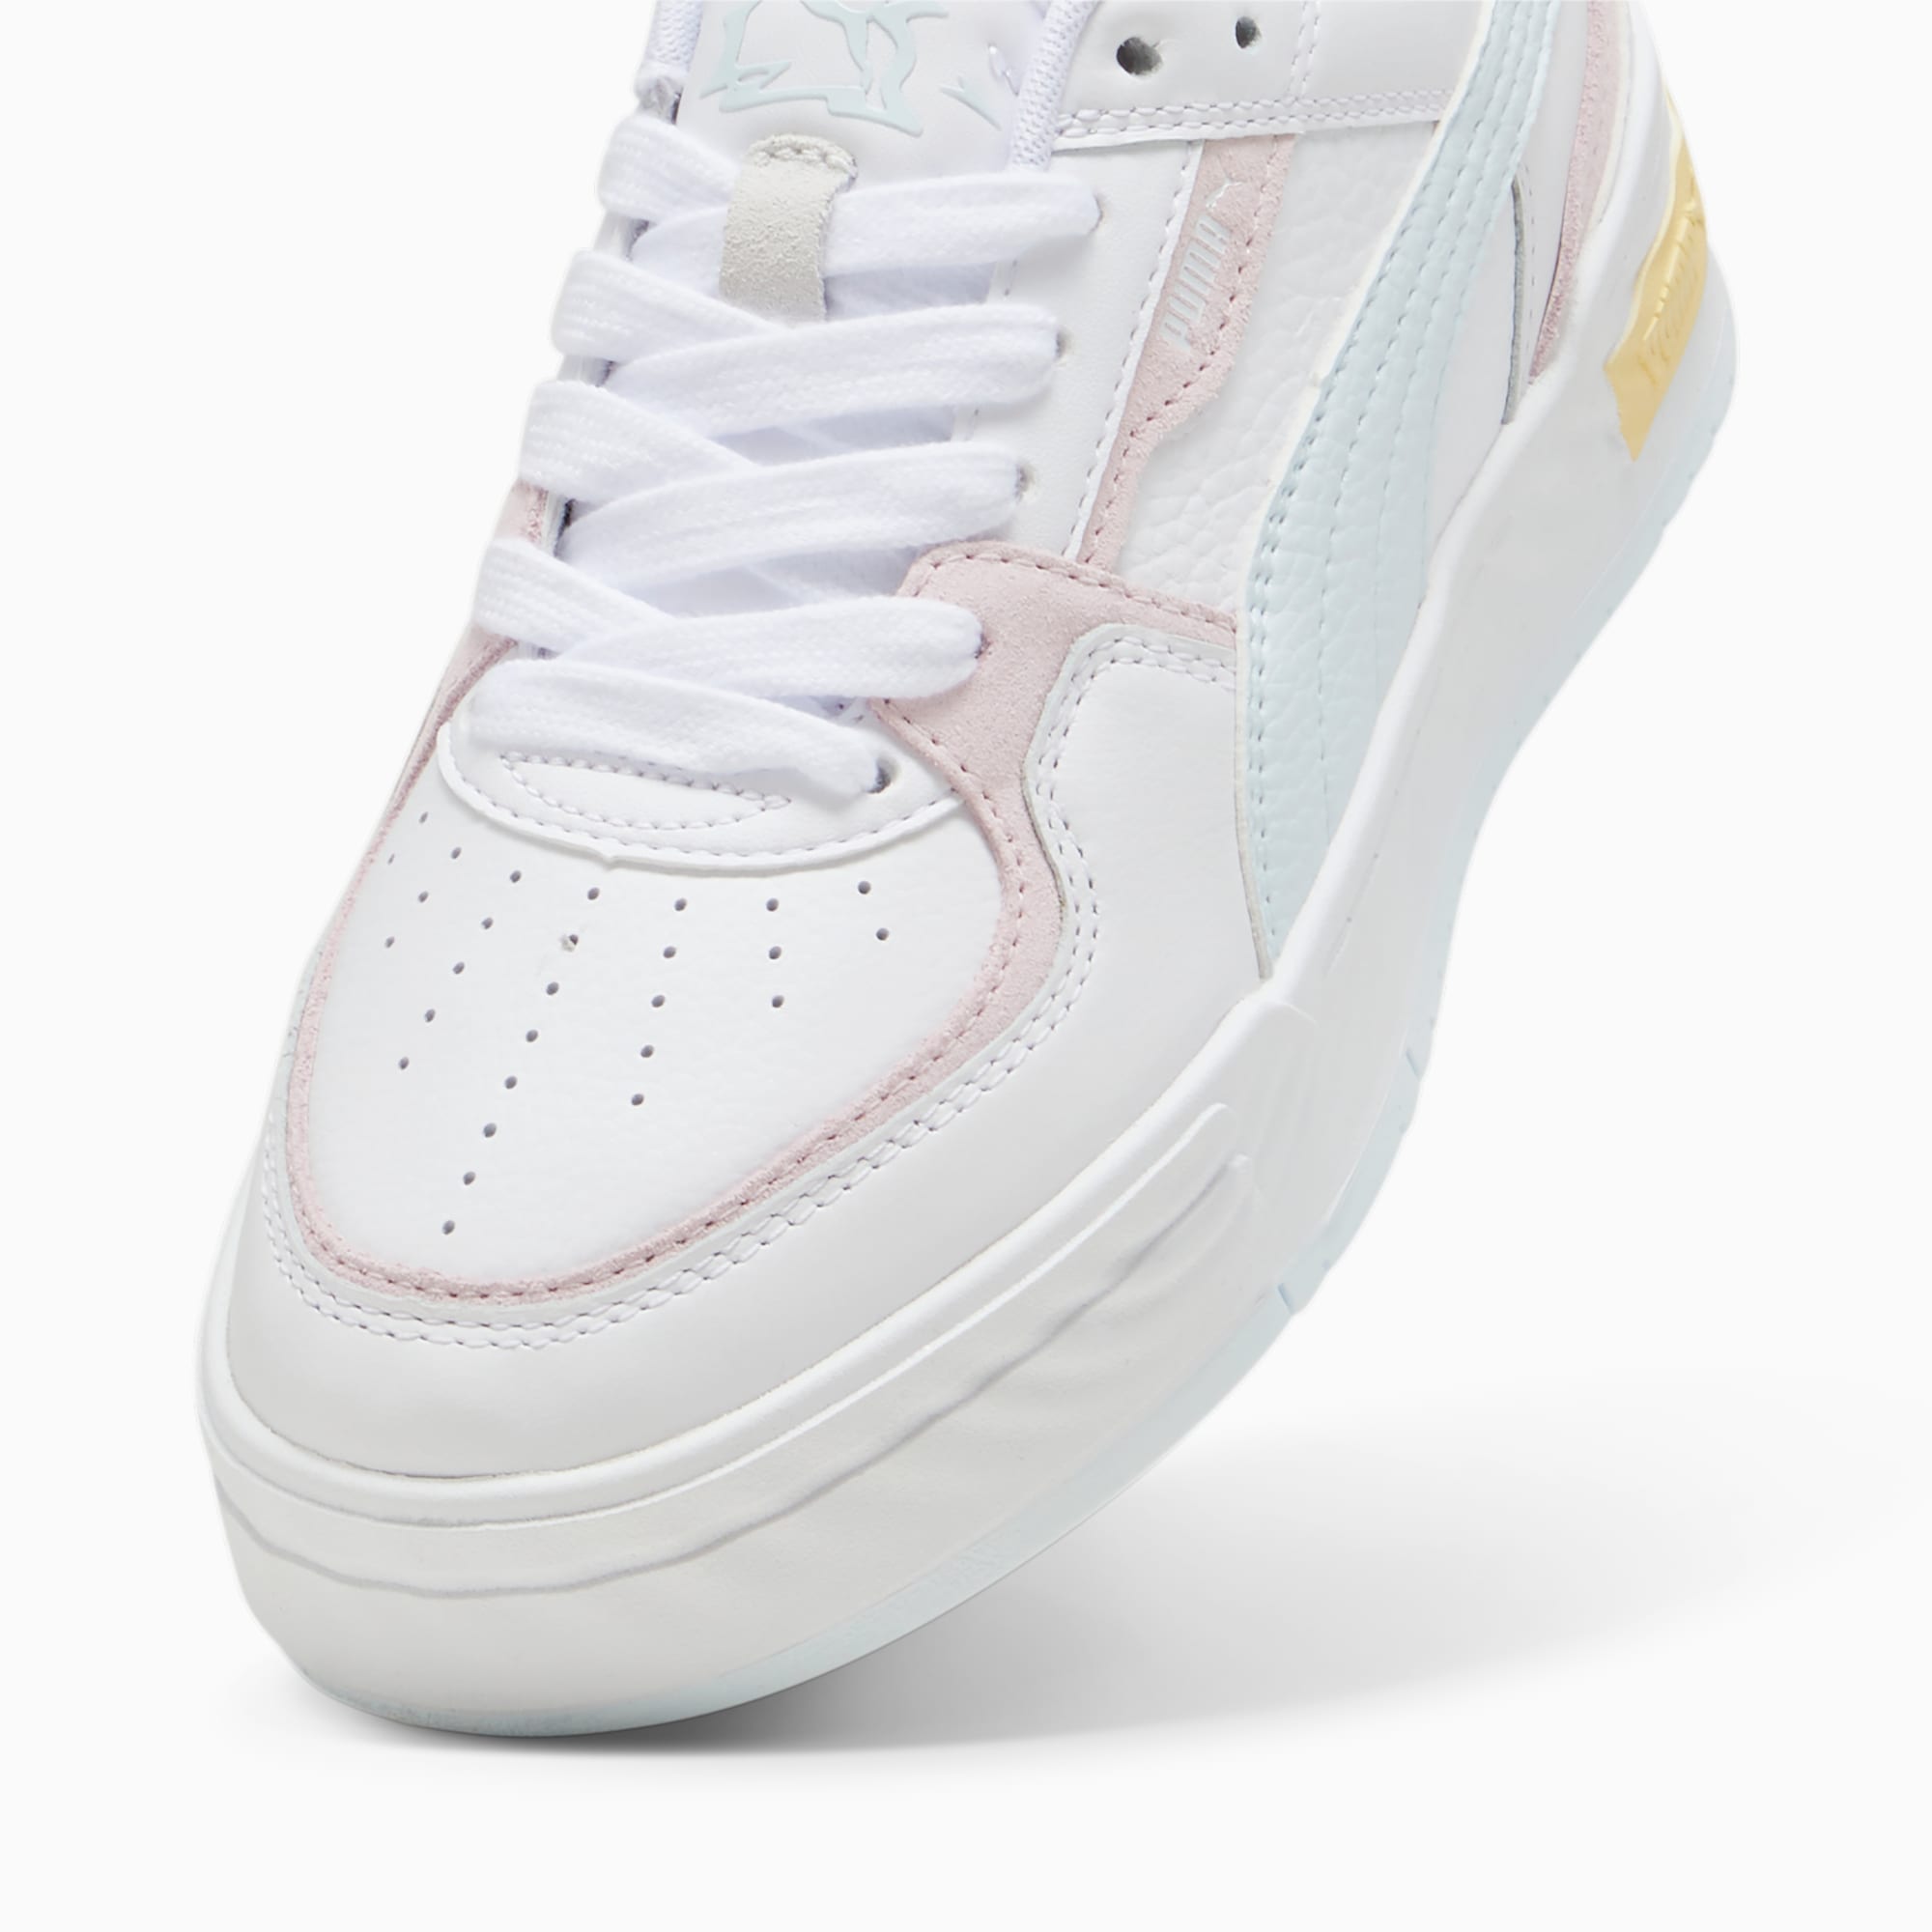 Women's PUMA Ca Pro Ripple Earth Sneakers, White/Whisp Of Pink/Dewdrop